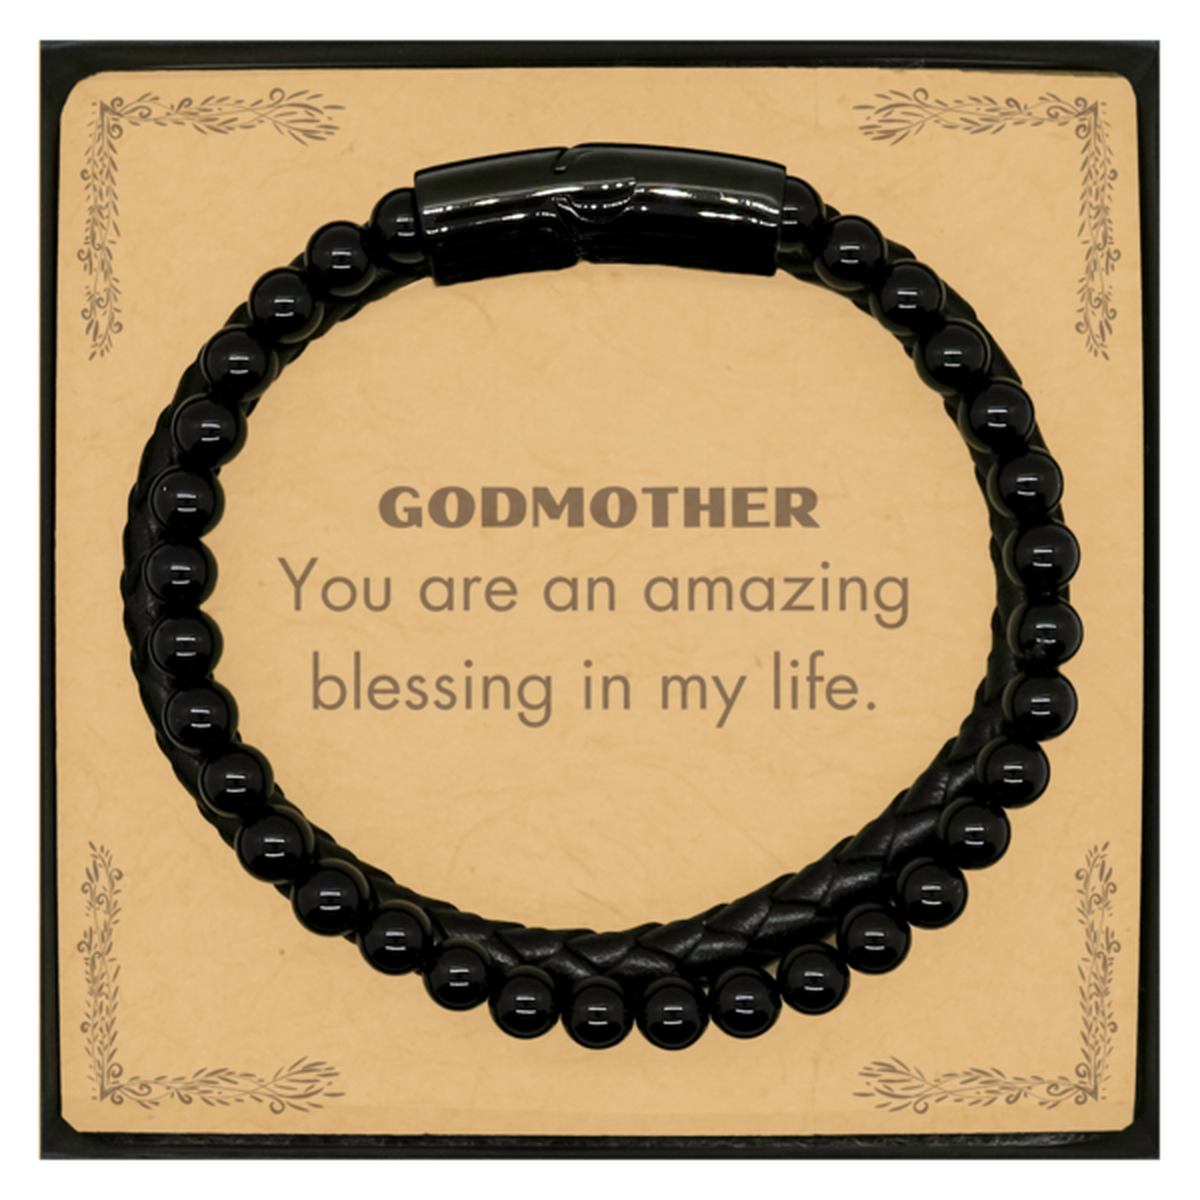 Godmother Stone Leather Bracelets, You are an amazing blessing in my life, Thank You Gifts For Godmother, Inspirational Birthday Christmas Unique Gifts For Godmother